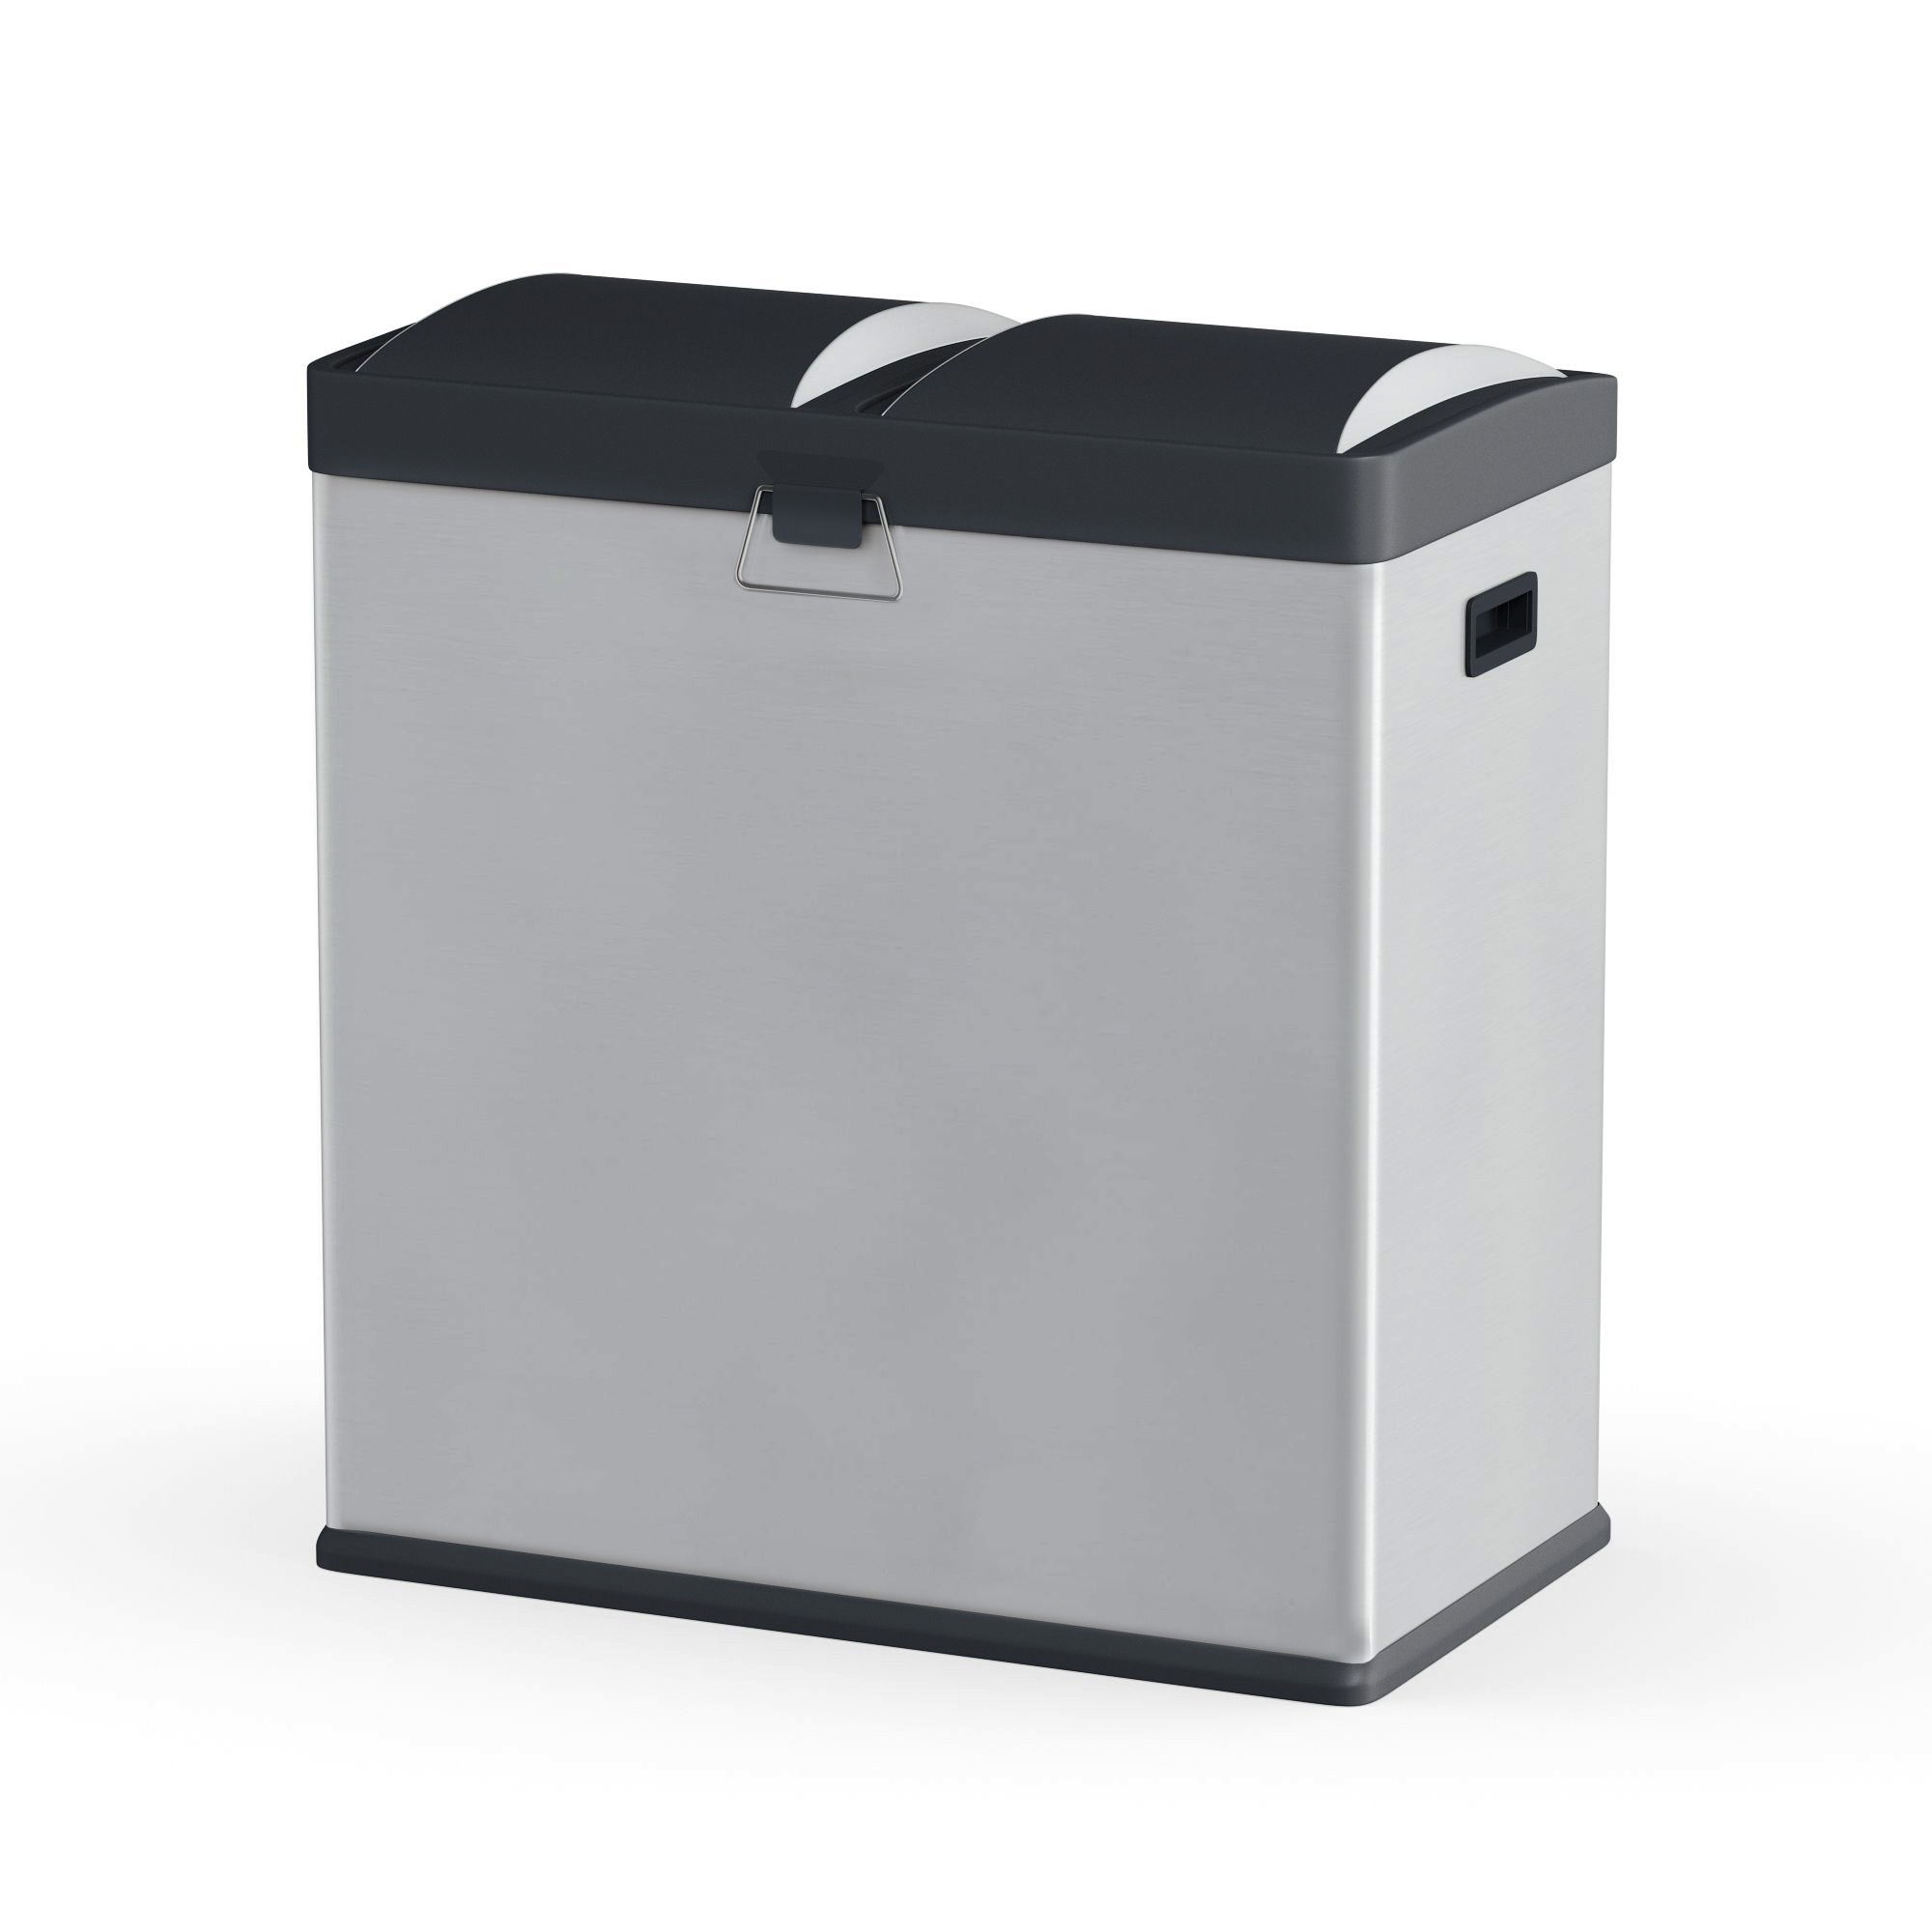 Step N' Sort 16 Gallon 2 Compartment Kitchen Trash Can & Recycling Bin, Silver - image 10 of 19